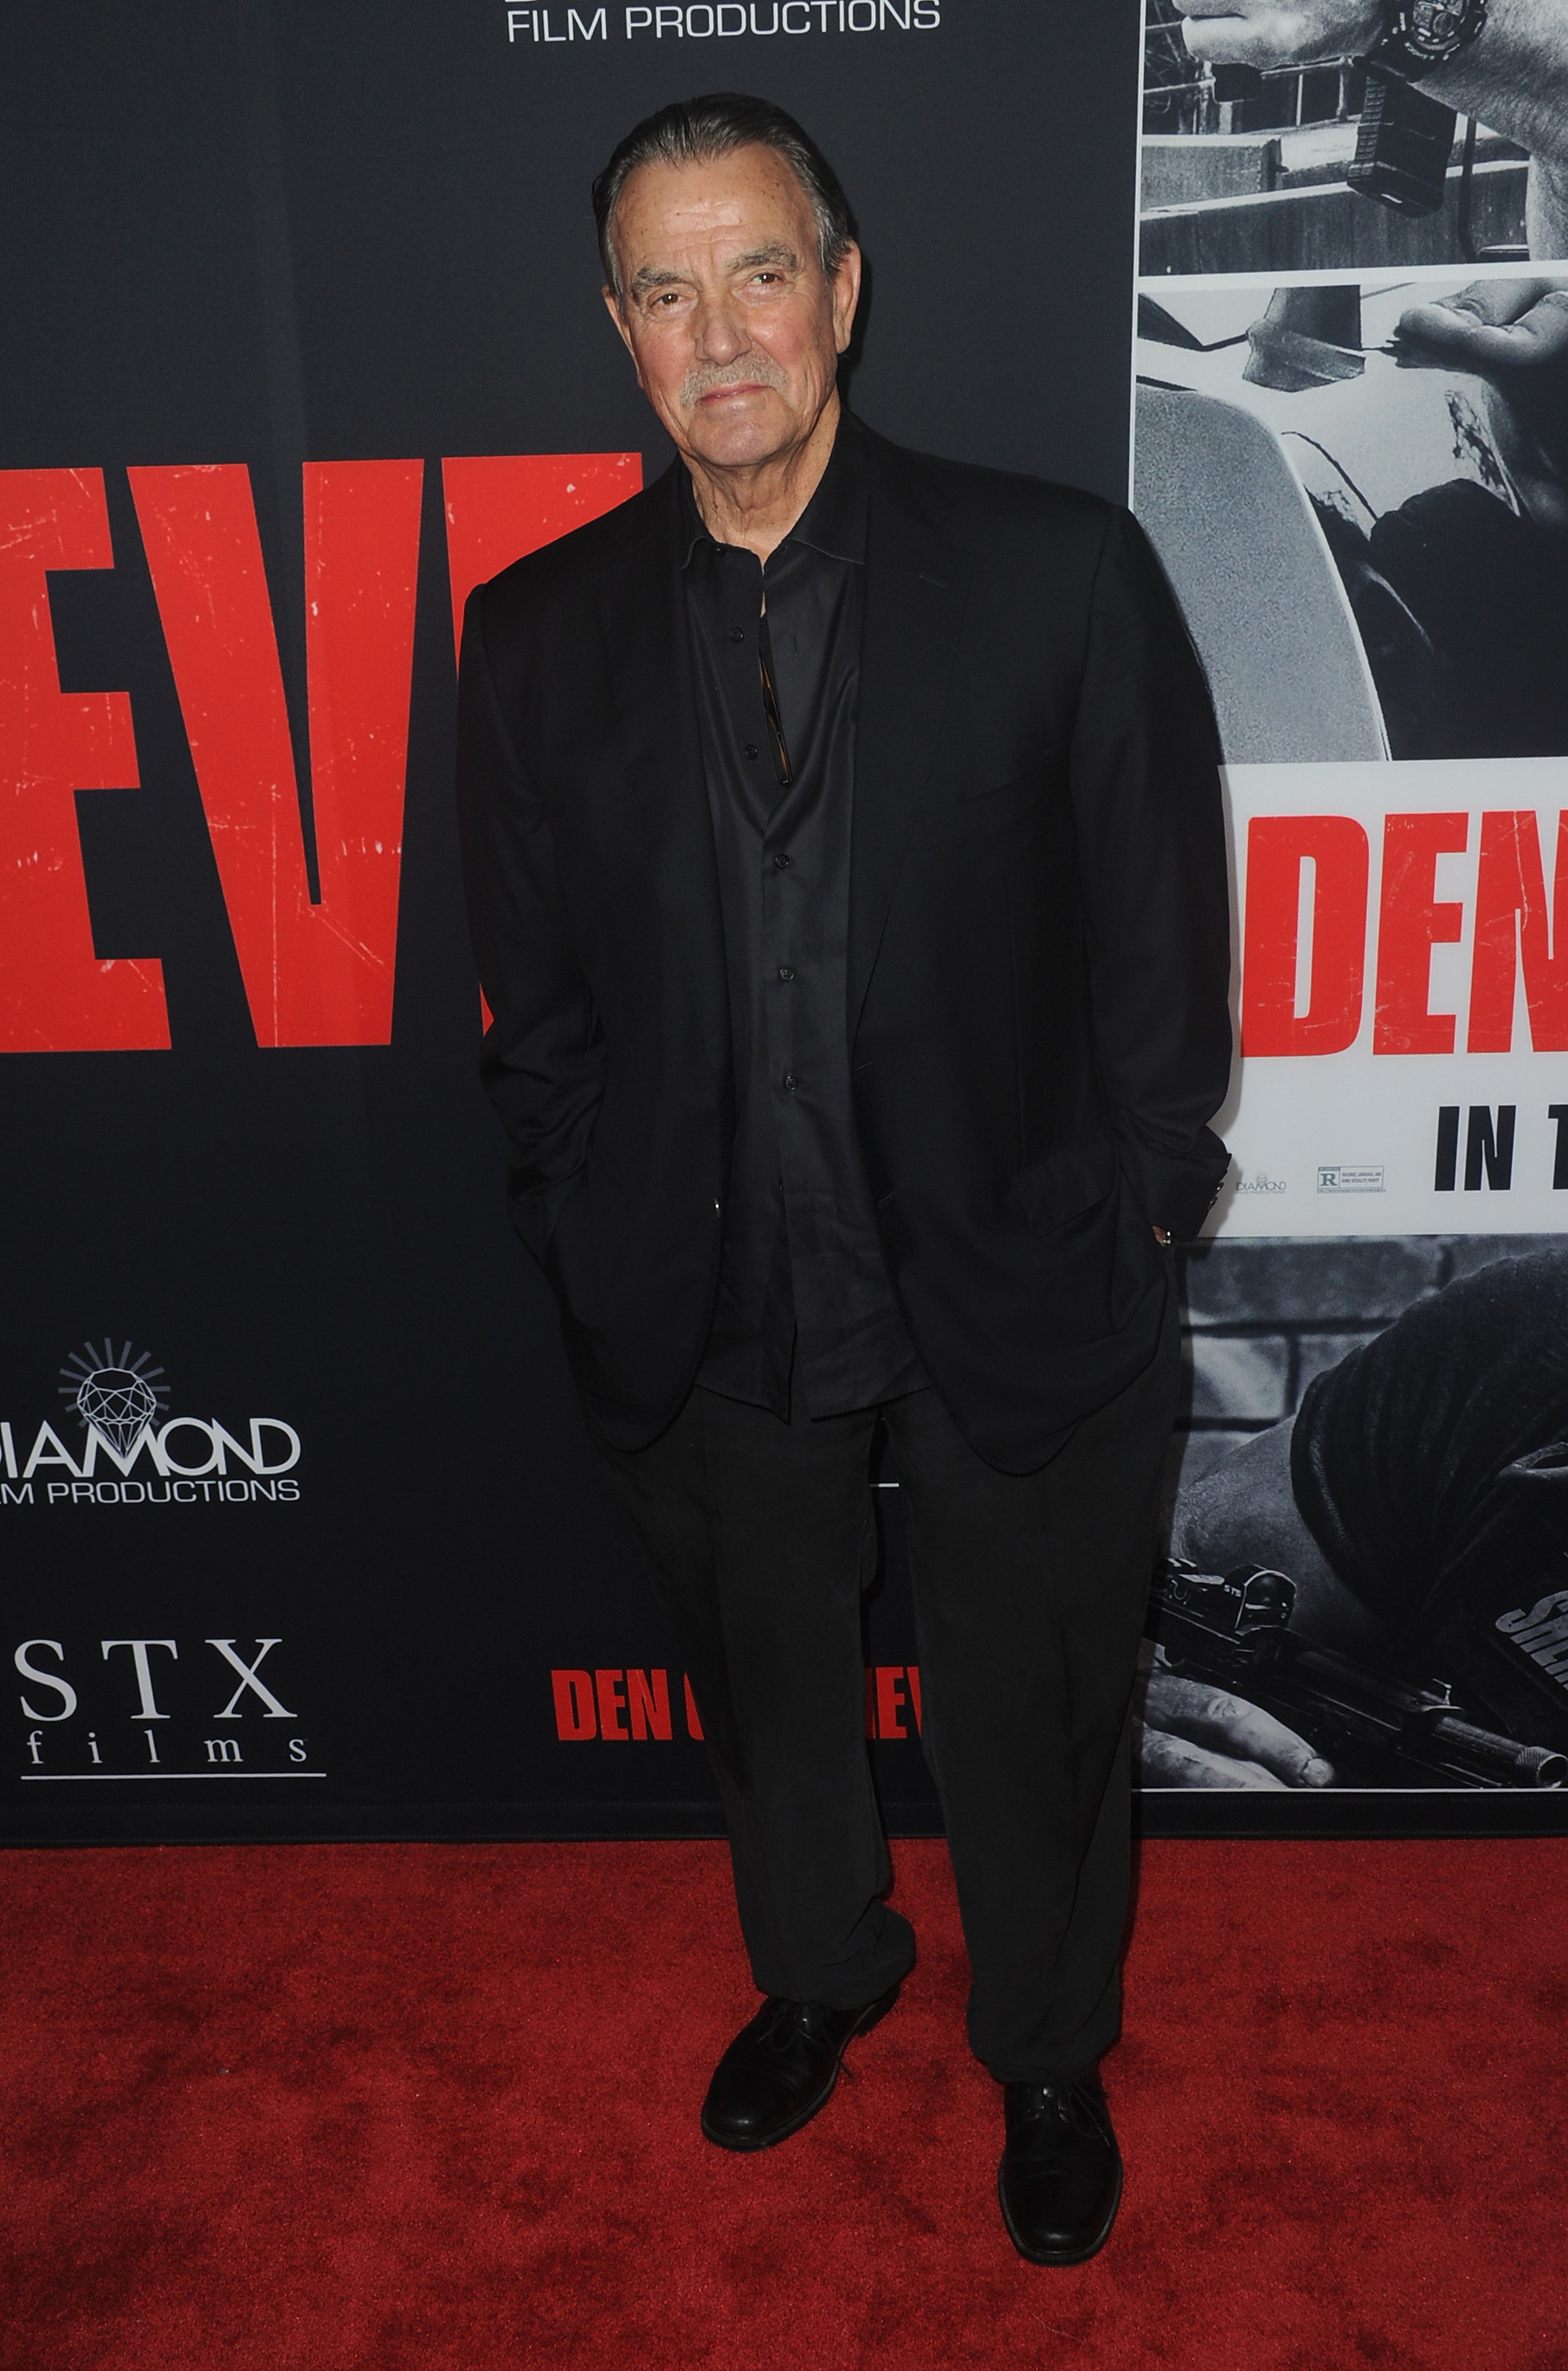 Eric Braeden attends the STX Films' "Den Of Thieves" premiere at Regal LA Live Stadium 14 on January 17, 2018, in Los Angeles, California. | Source: Getty Images